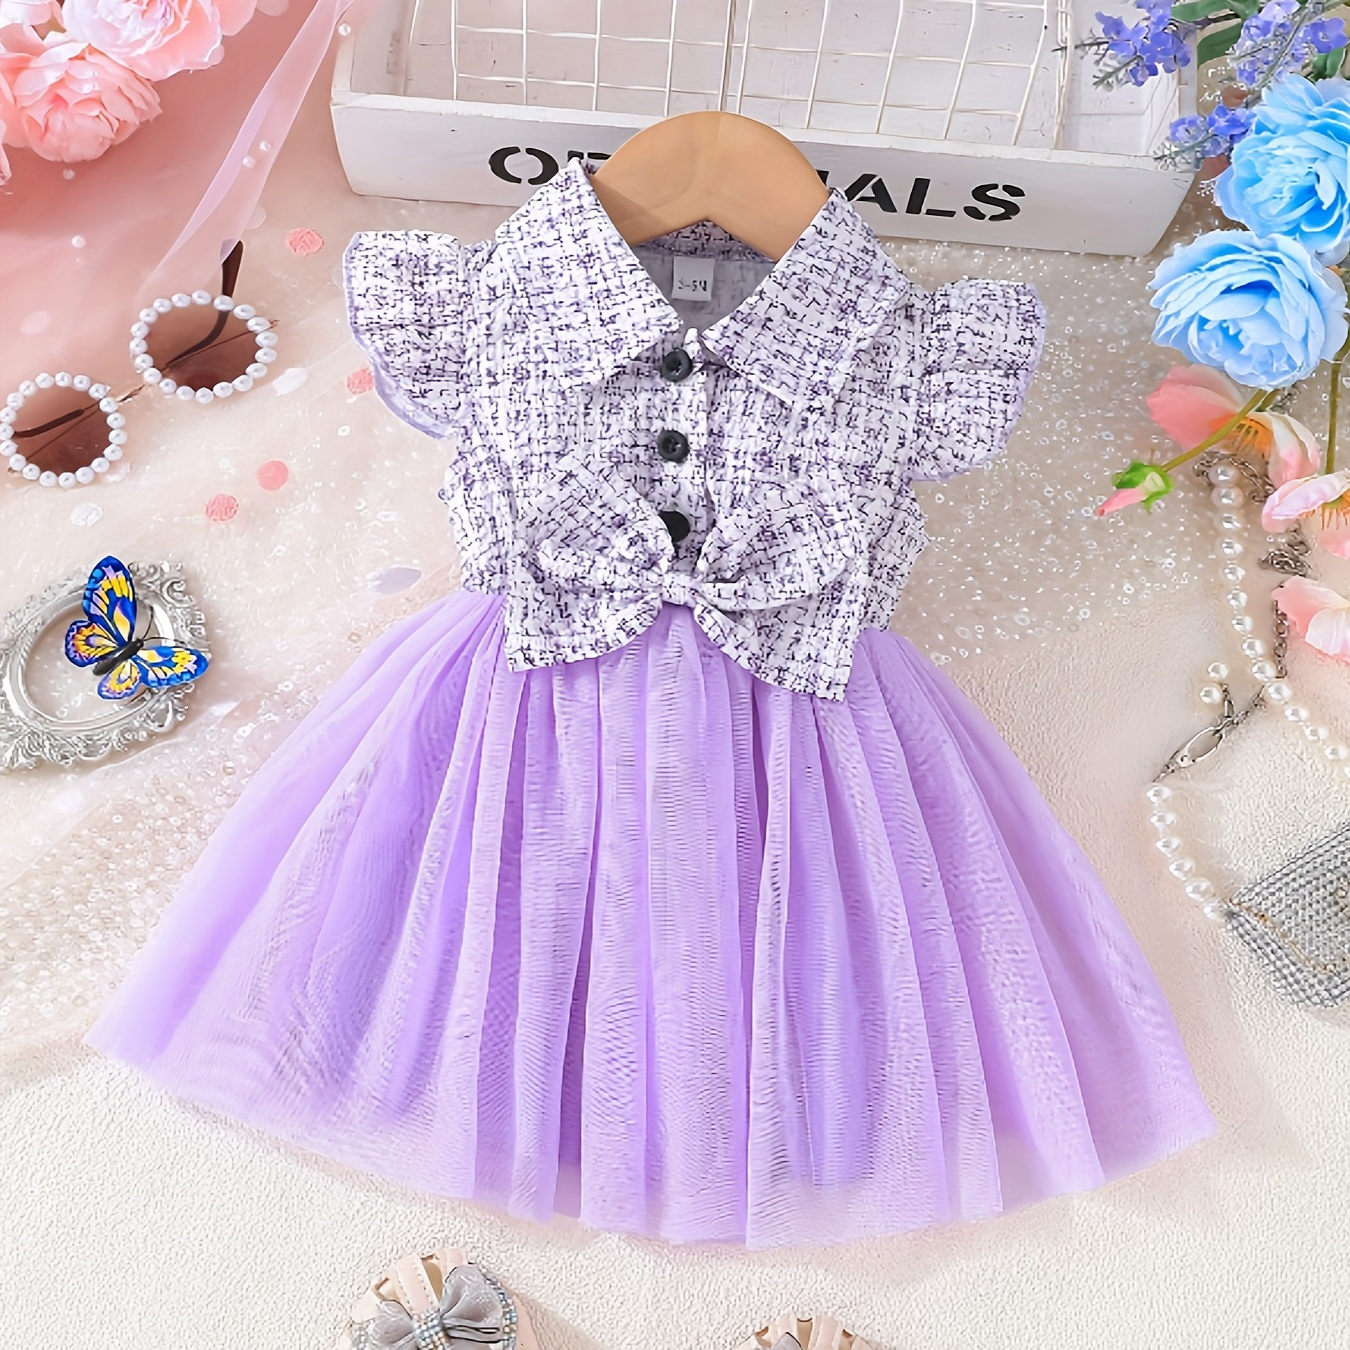 

Baby Girl's Mesh Dress Tutu Skirt Bow Decor Button Front Princess Dress Holiday Party Prom Birthday Baby's Clothes